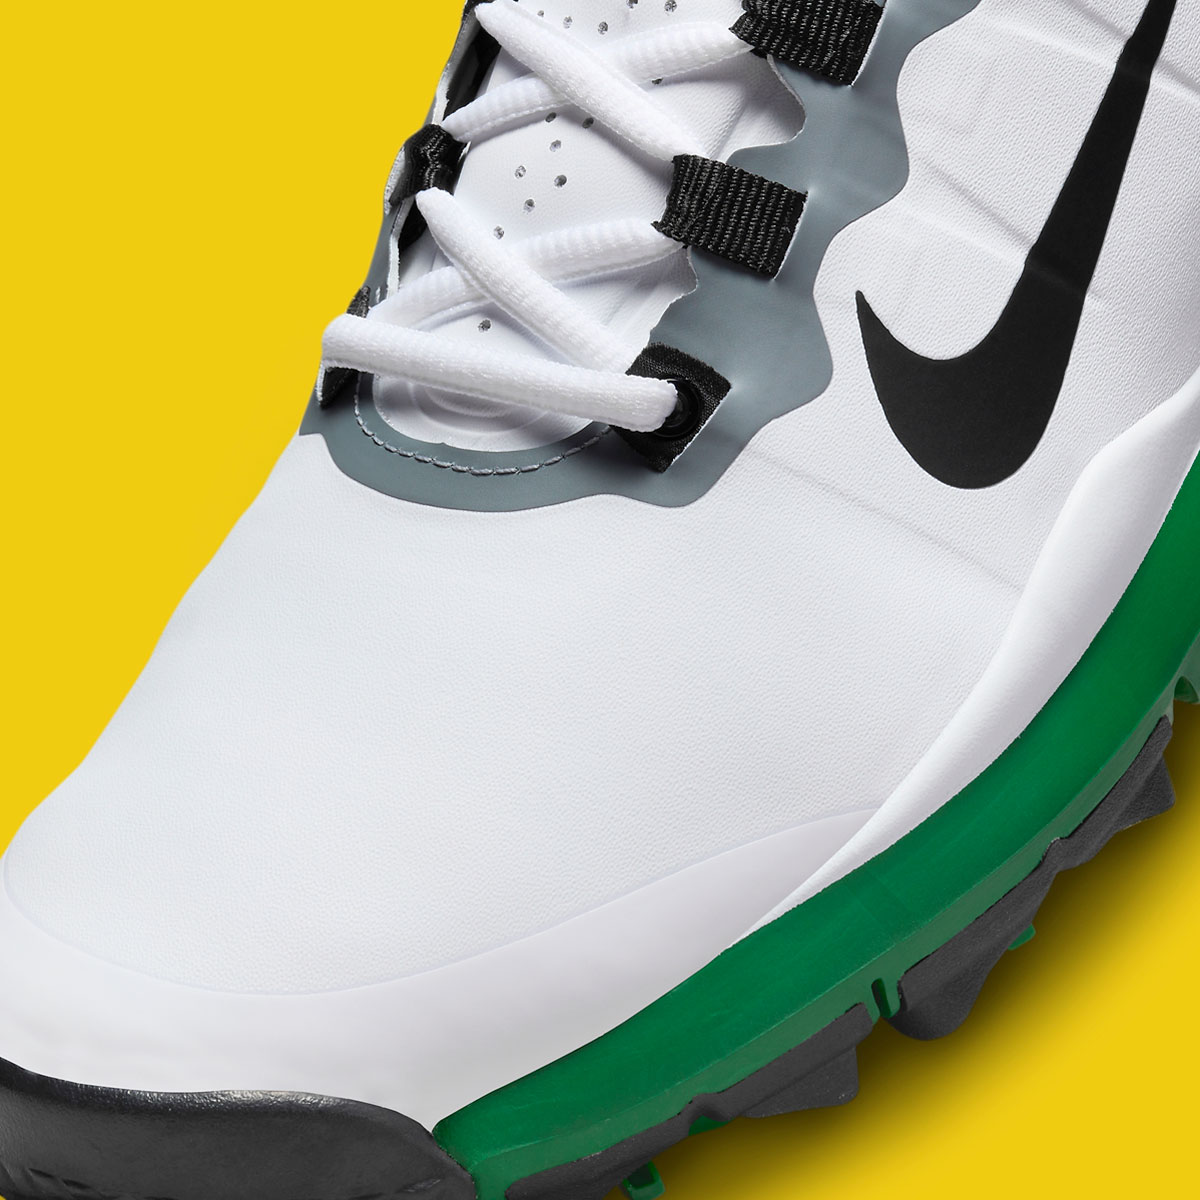 Nike Tw 13 Masters White Pine Green Cool Grey Dr5752 100 Store List 20